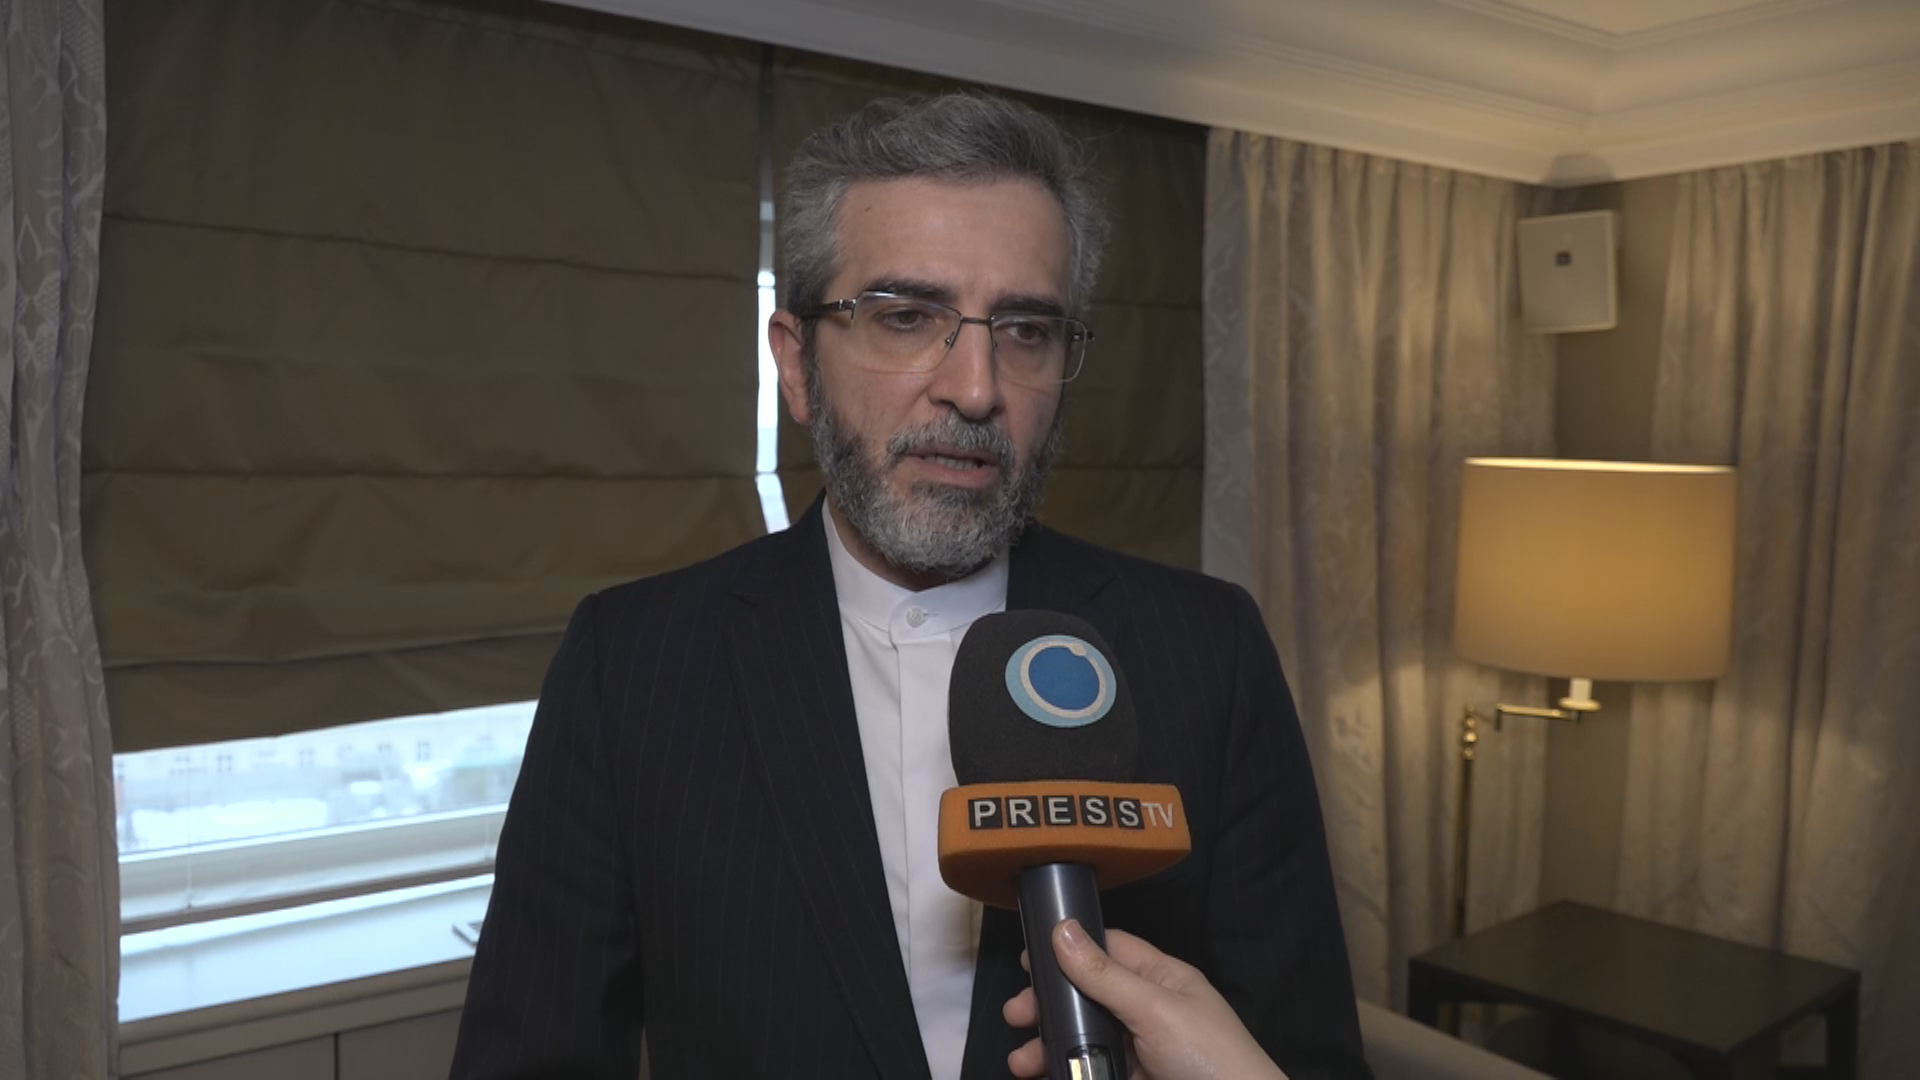 Top negotiator says 2015 nuclear deal Iran's red line, anything less unacceptable